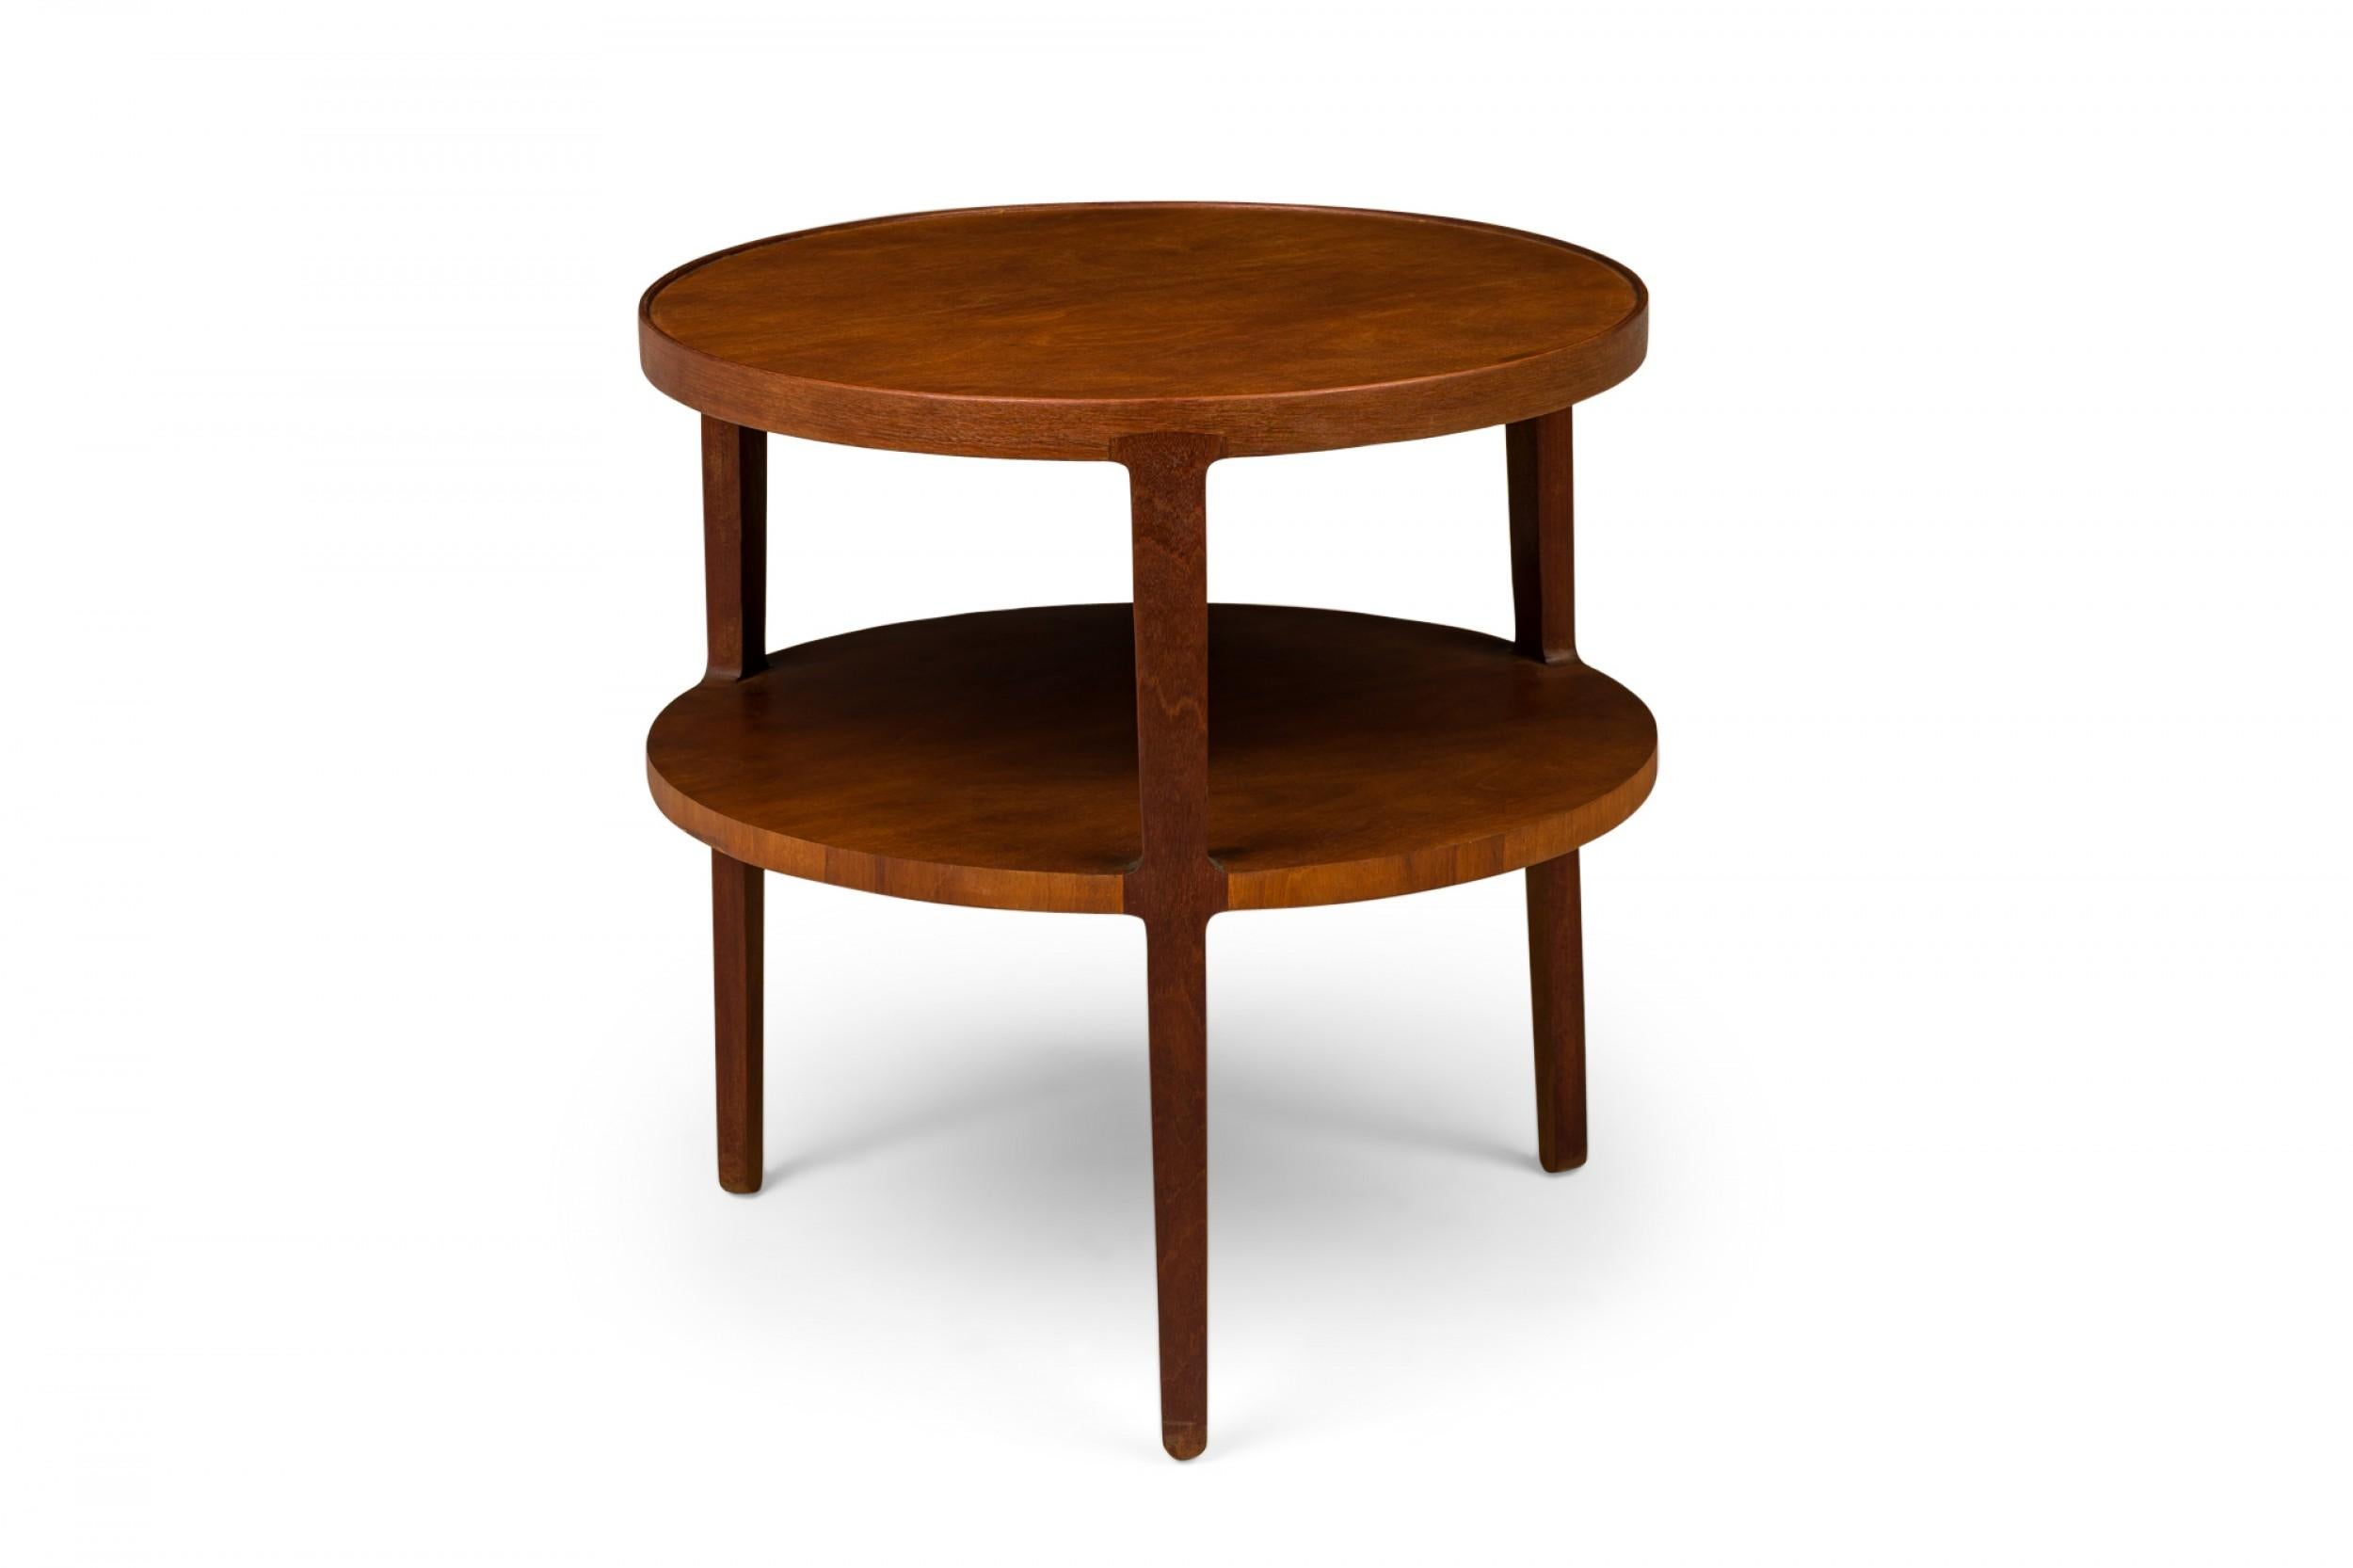 American mid-century two-tier end / side table with a circular top above a circular stretcher shelf supported by three tapered legs, finished in walnut veneer. (EDWARD WORMLEY FOR DUNBAR FURNITURE COMPANY)